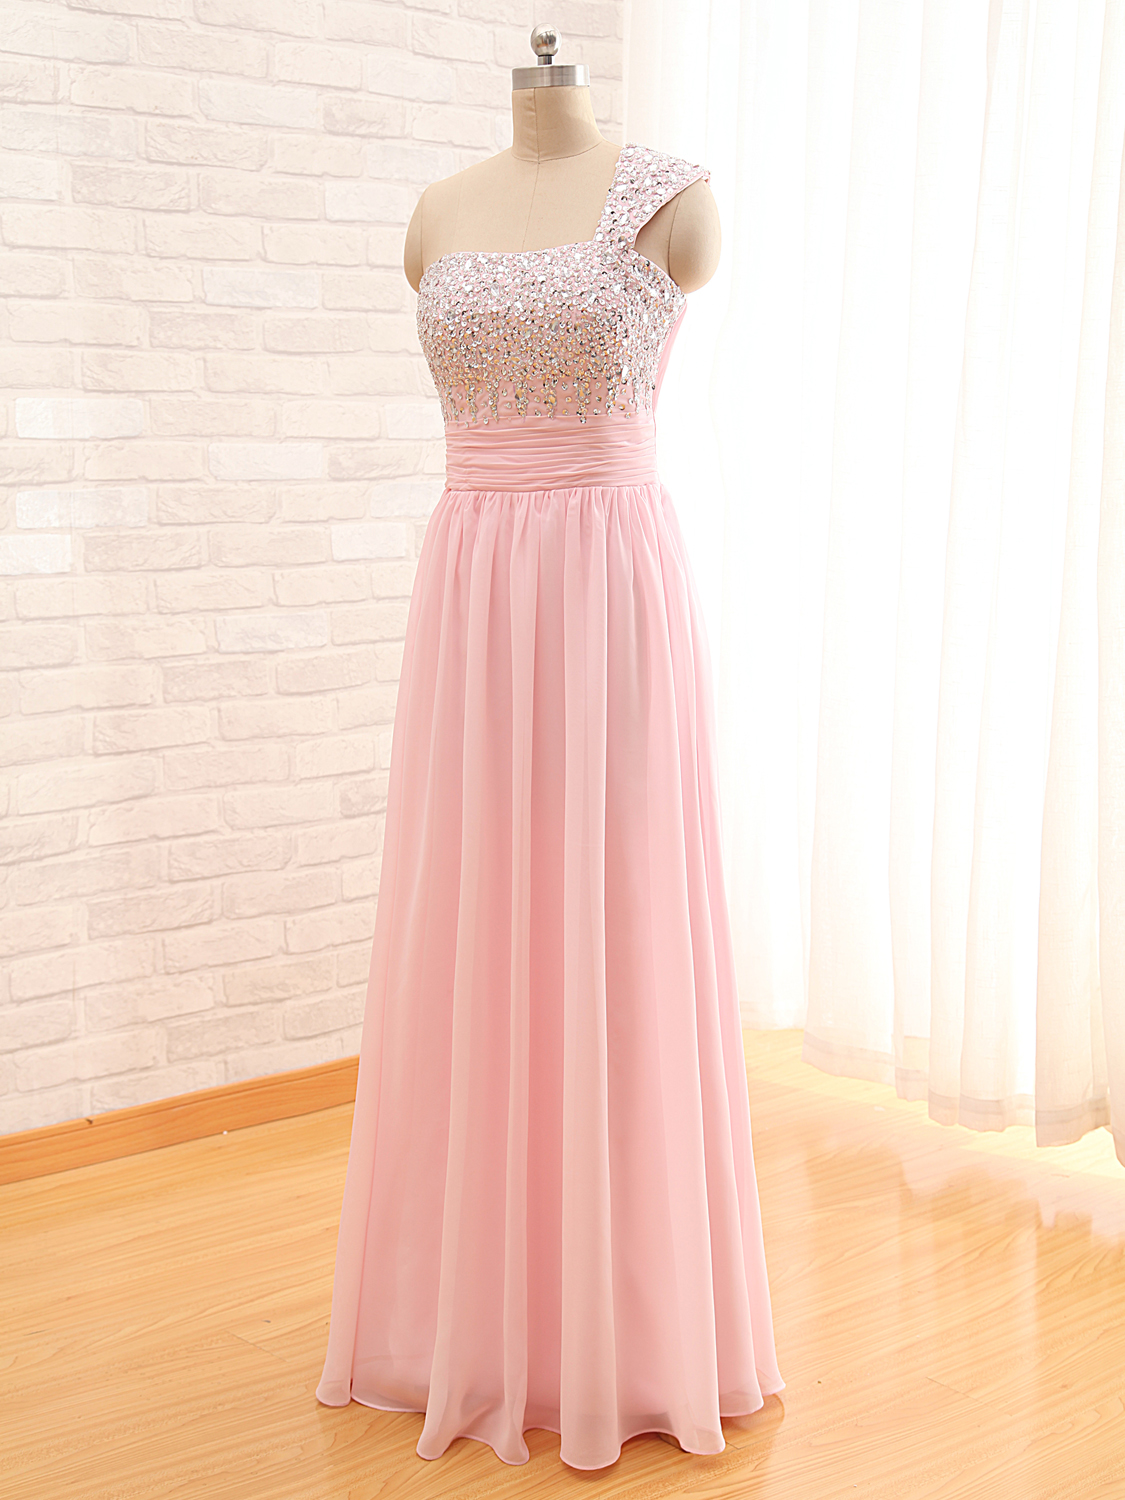 Marvelous Pink One Shoulder Formal Dresses Floor Length Ruched Beaded Embellished Chiffon Party Prom Gowns